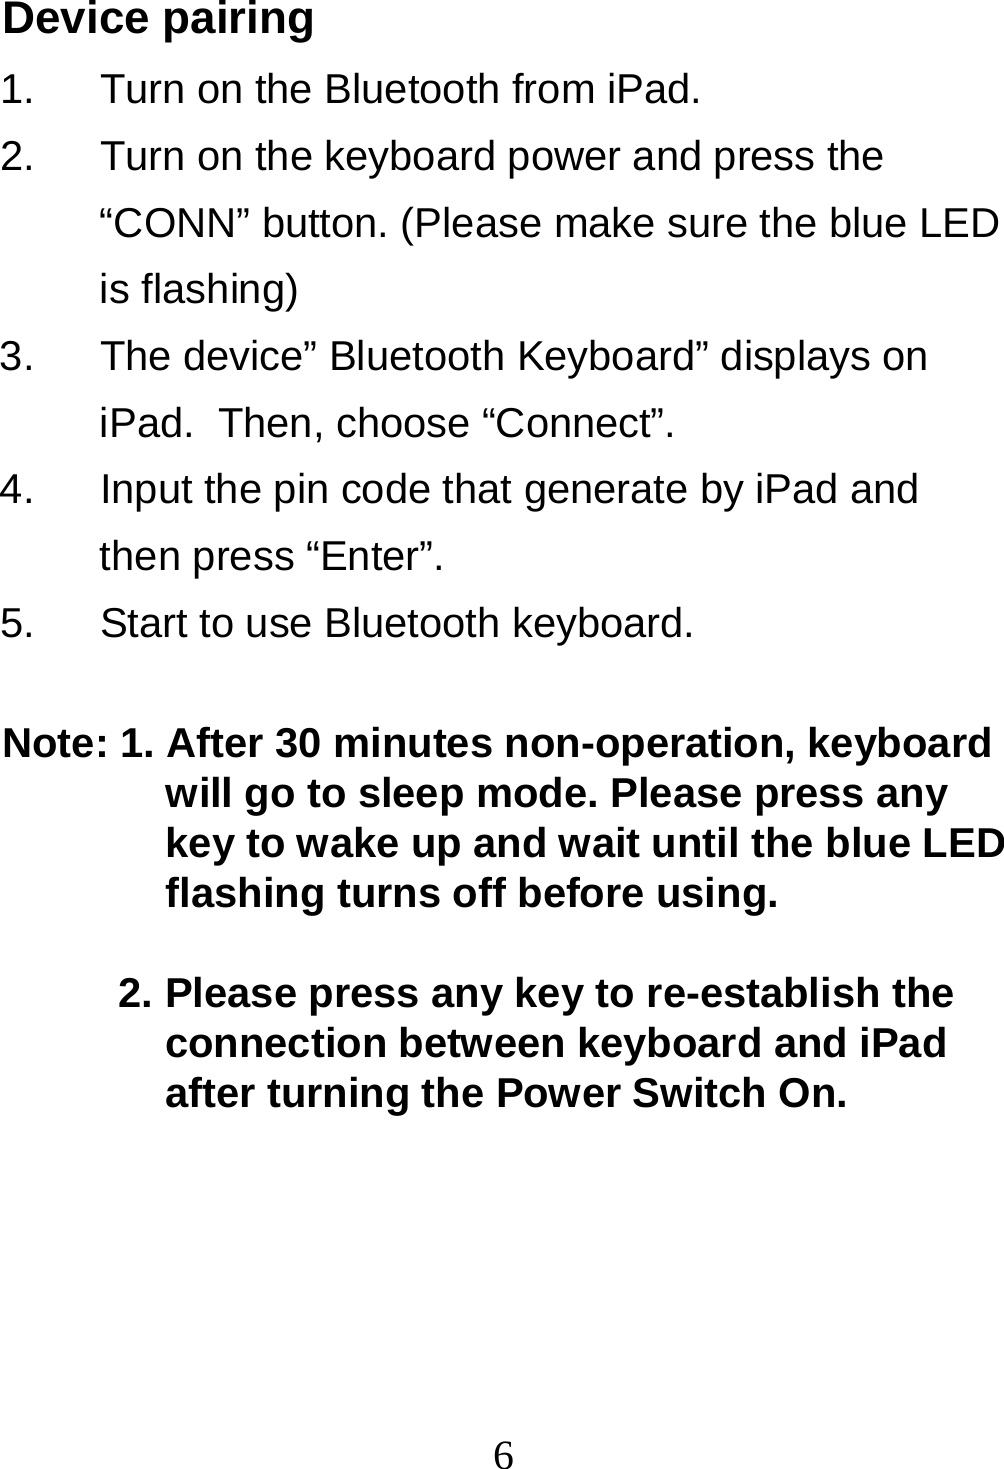  6Device pairing 1.  Turn on the Bluetooth from iPad. 2.  Turn on the keyboard power and press the “CONN” button. (Please make sure the blue LED is flashing) 3.  The device” Bluetooth Keyboard” displays on iPad.  Then, choose “Connect”. 4.  Input the pin code that generate by iPad and then press “Enter”. 5.  Start to use Bluetooth keyboard.  Note: 1. After 30 minutes non-operation, keyboard will go to sleep mode. Please press any key to wake up and wait until the blue LED flashing turns off before using.   2. Please press any key to re-establish the connection between keyboard and iPad after turning the Power Switch On.  